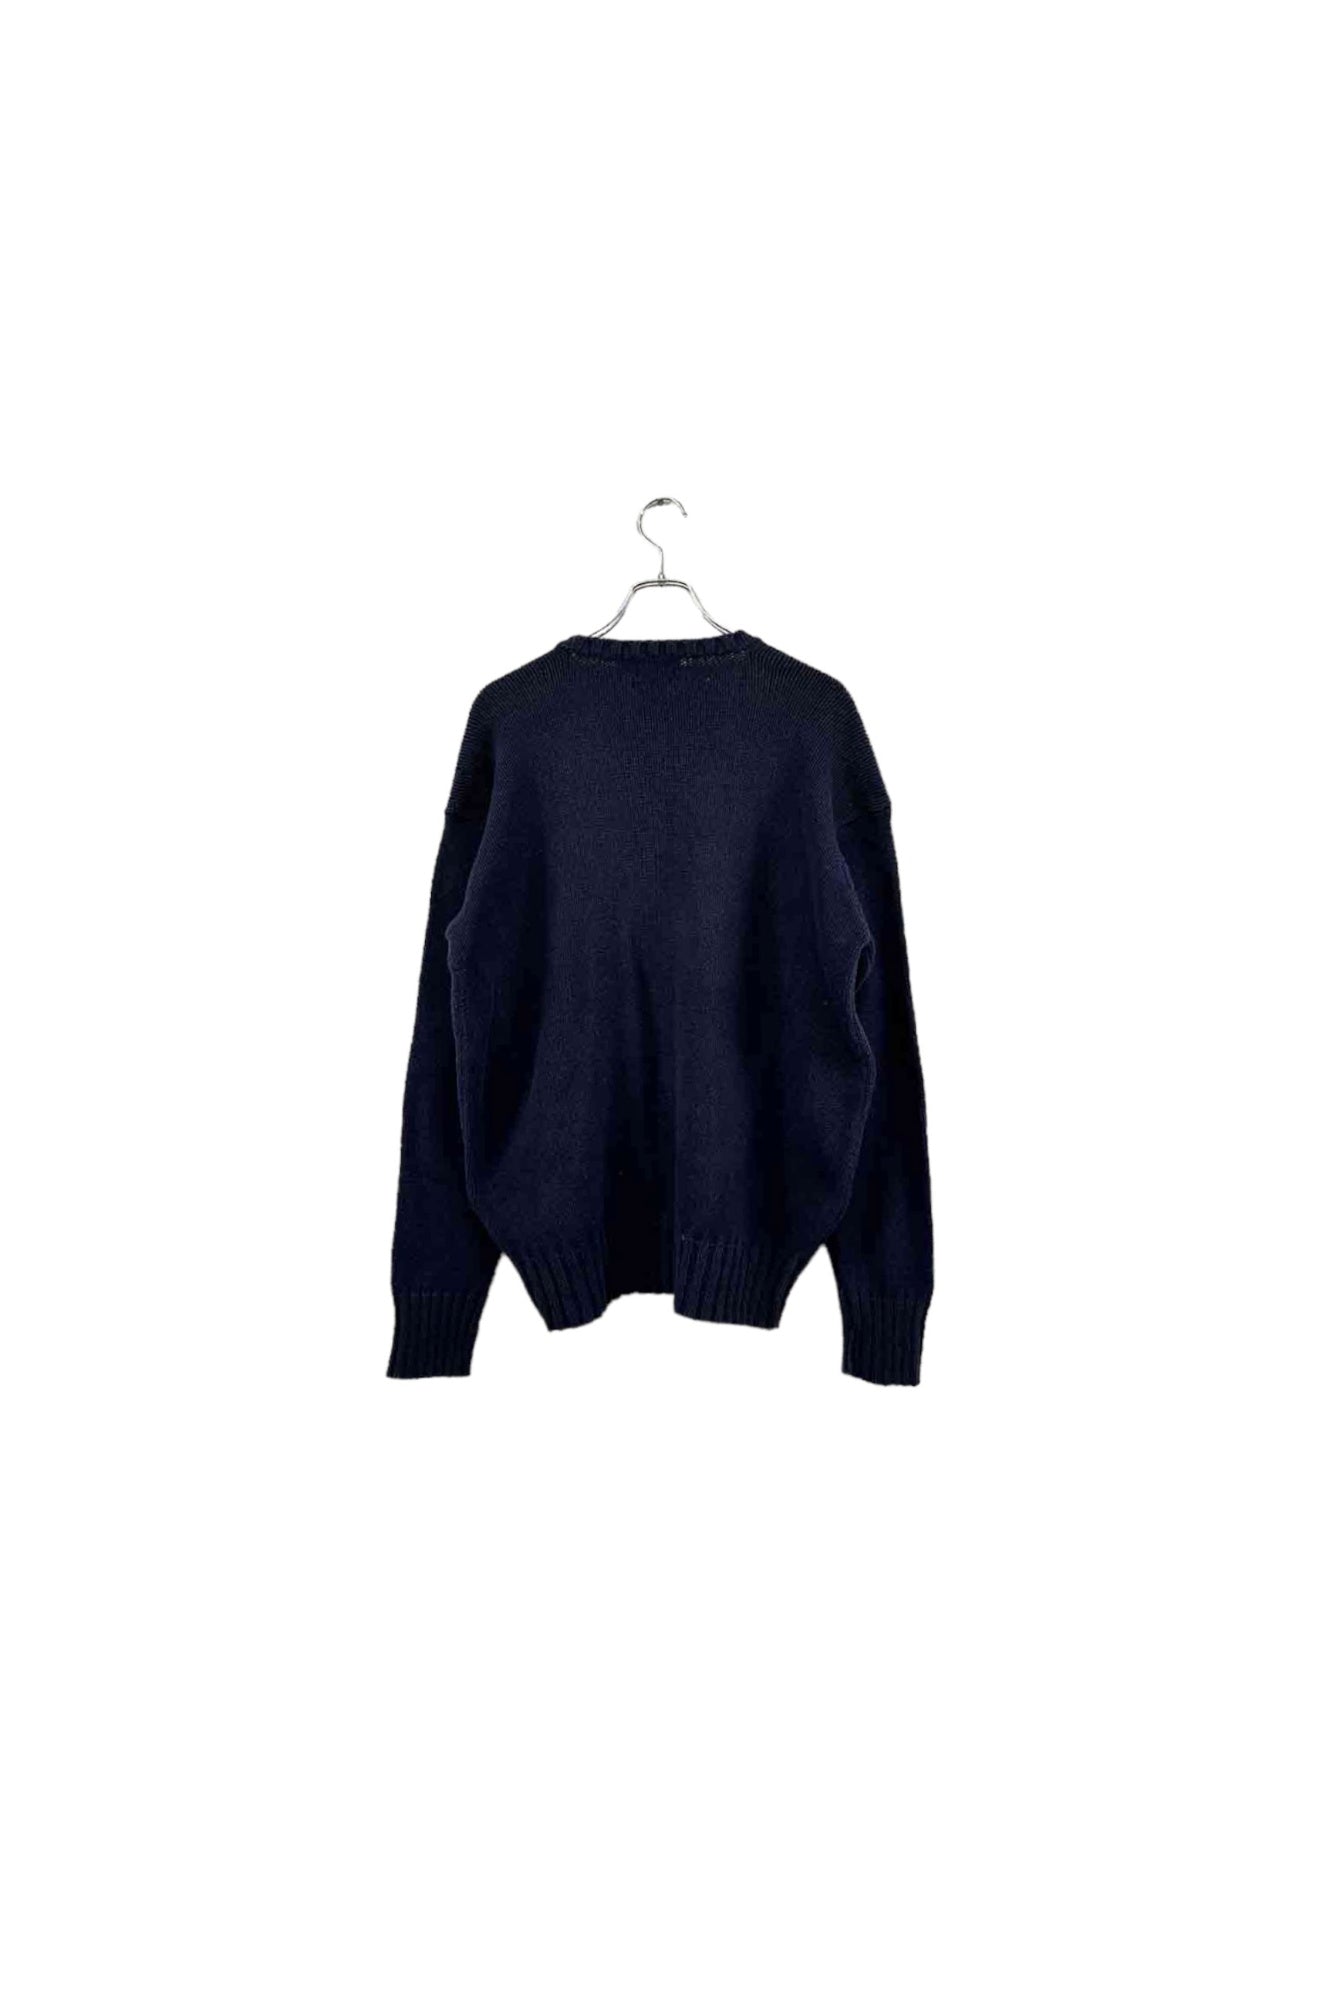 90's Polo by Ralph Lauren navy sweater